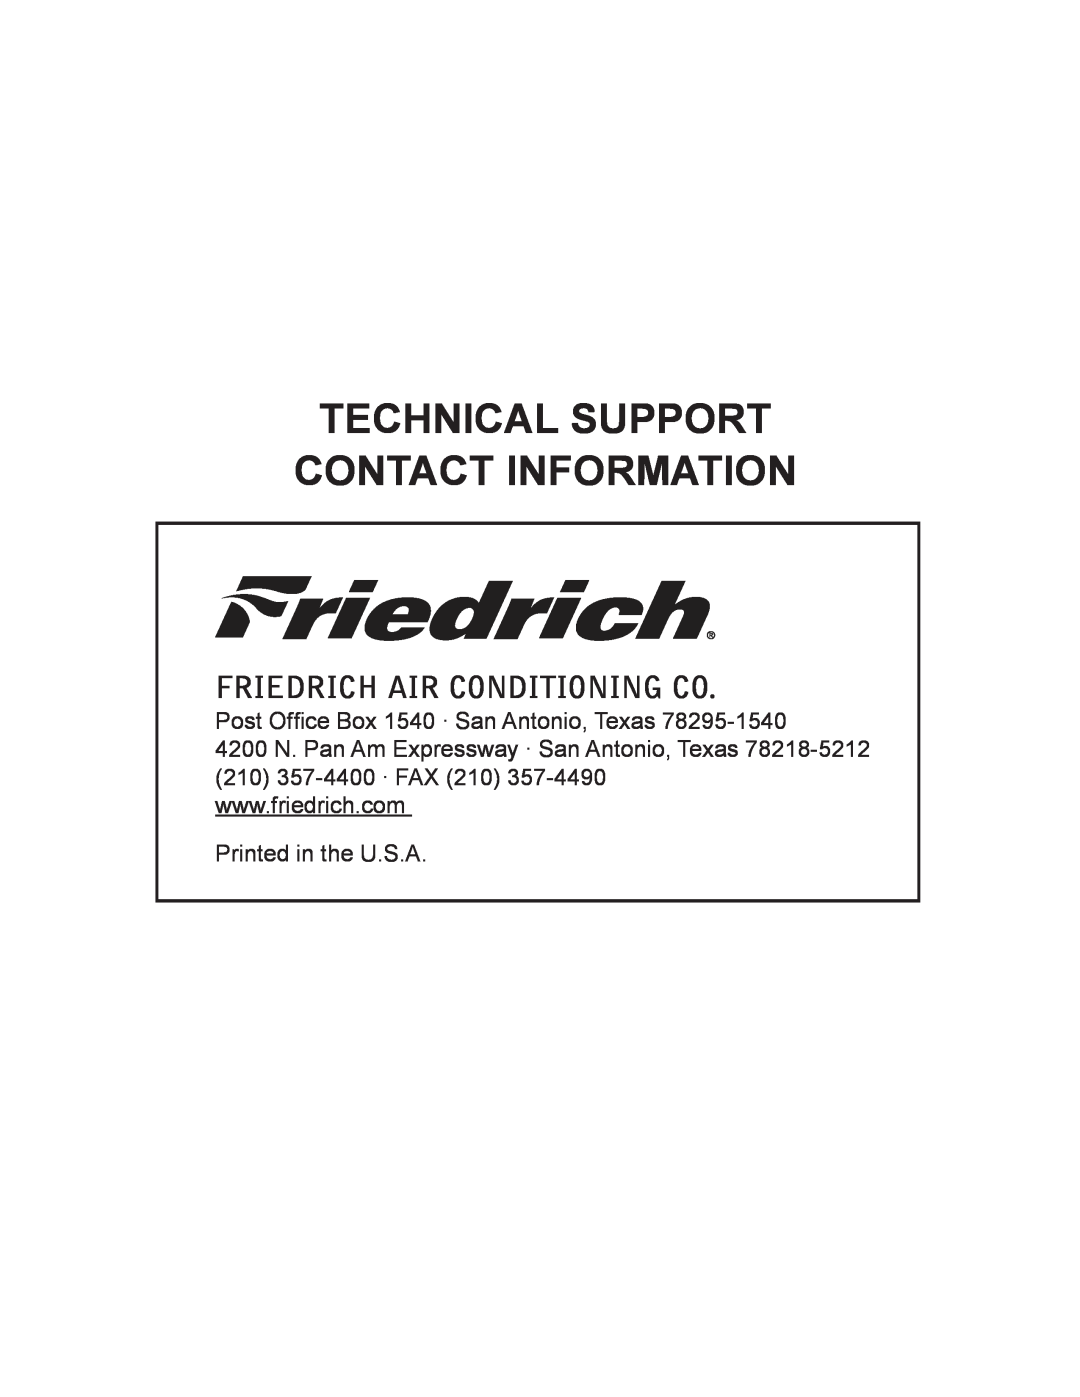 Friedrich 2009, 2008 service manual Technical Support Contact Information, Friedrich Air Conditioning Co 